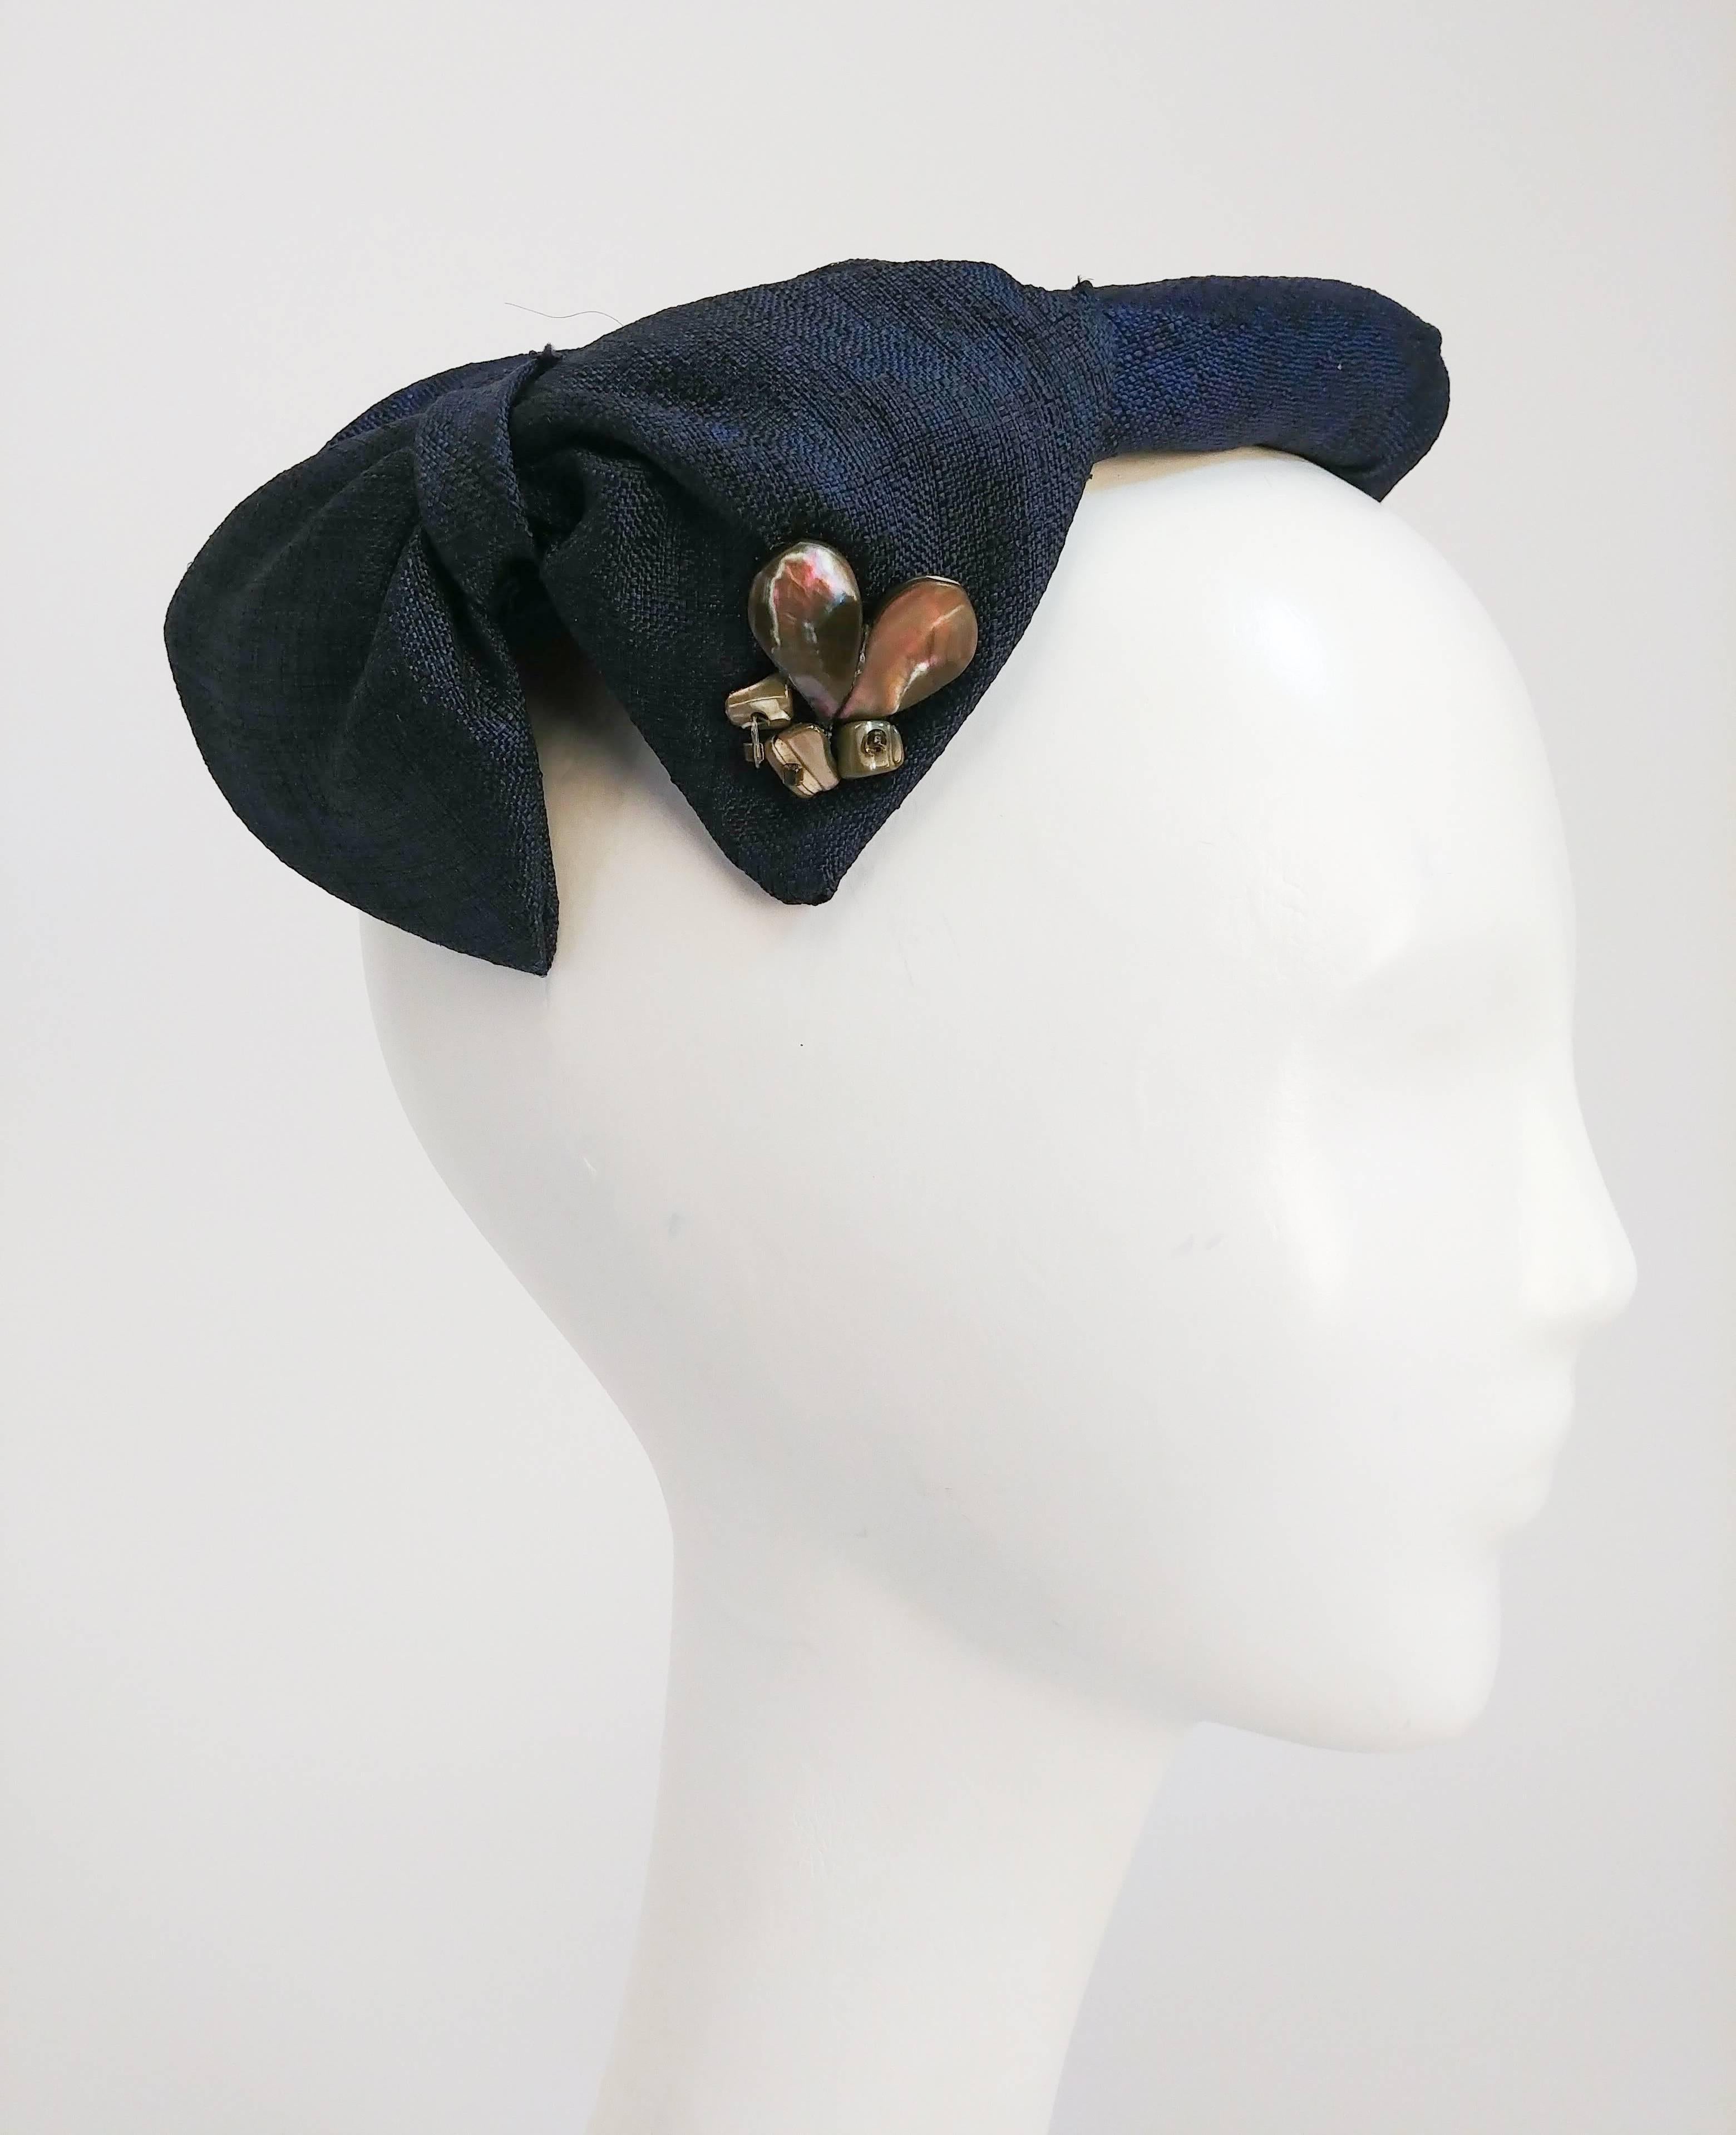 1950s Blue Cocktail Hat w/ Shell Embellishment. Blue cocktail hat featuring shell and stone embellishment, bows adorning the sides and a gather in the center of the top. Open Size.